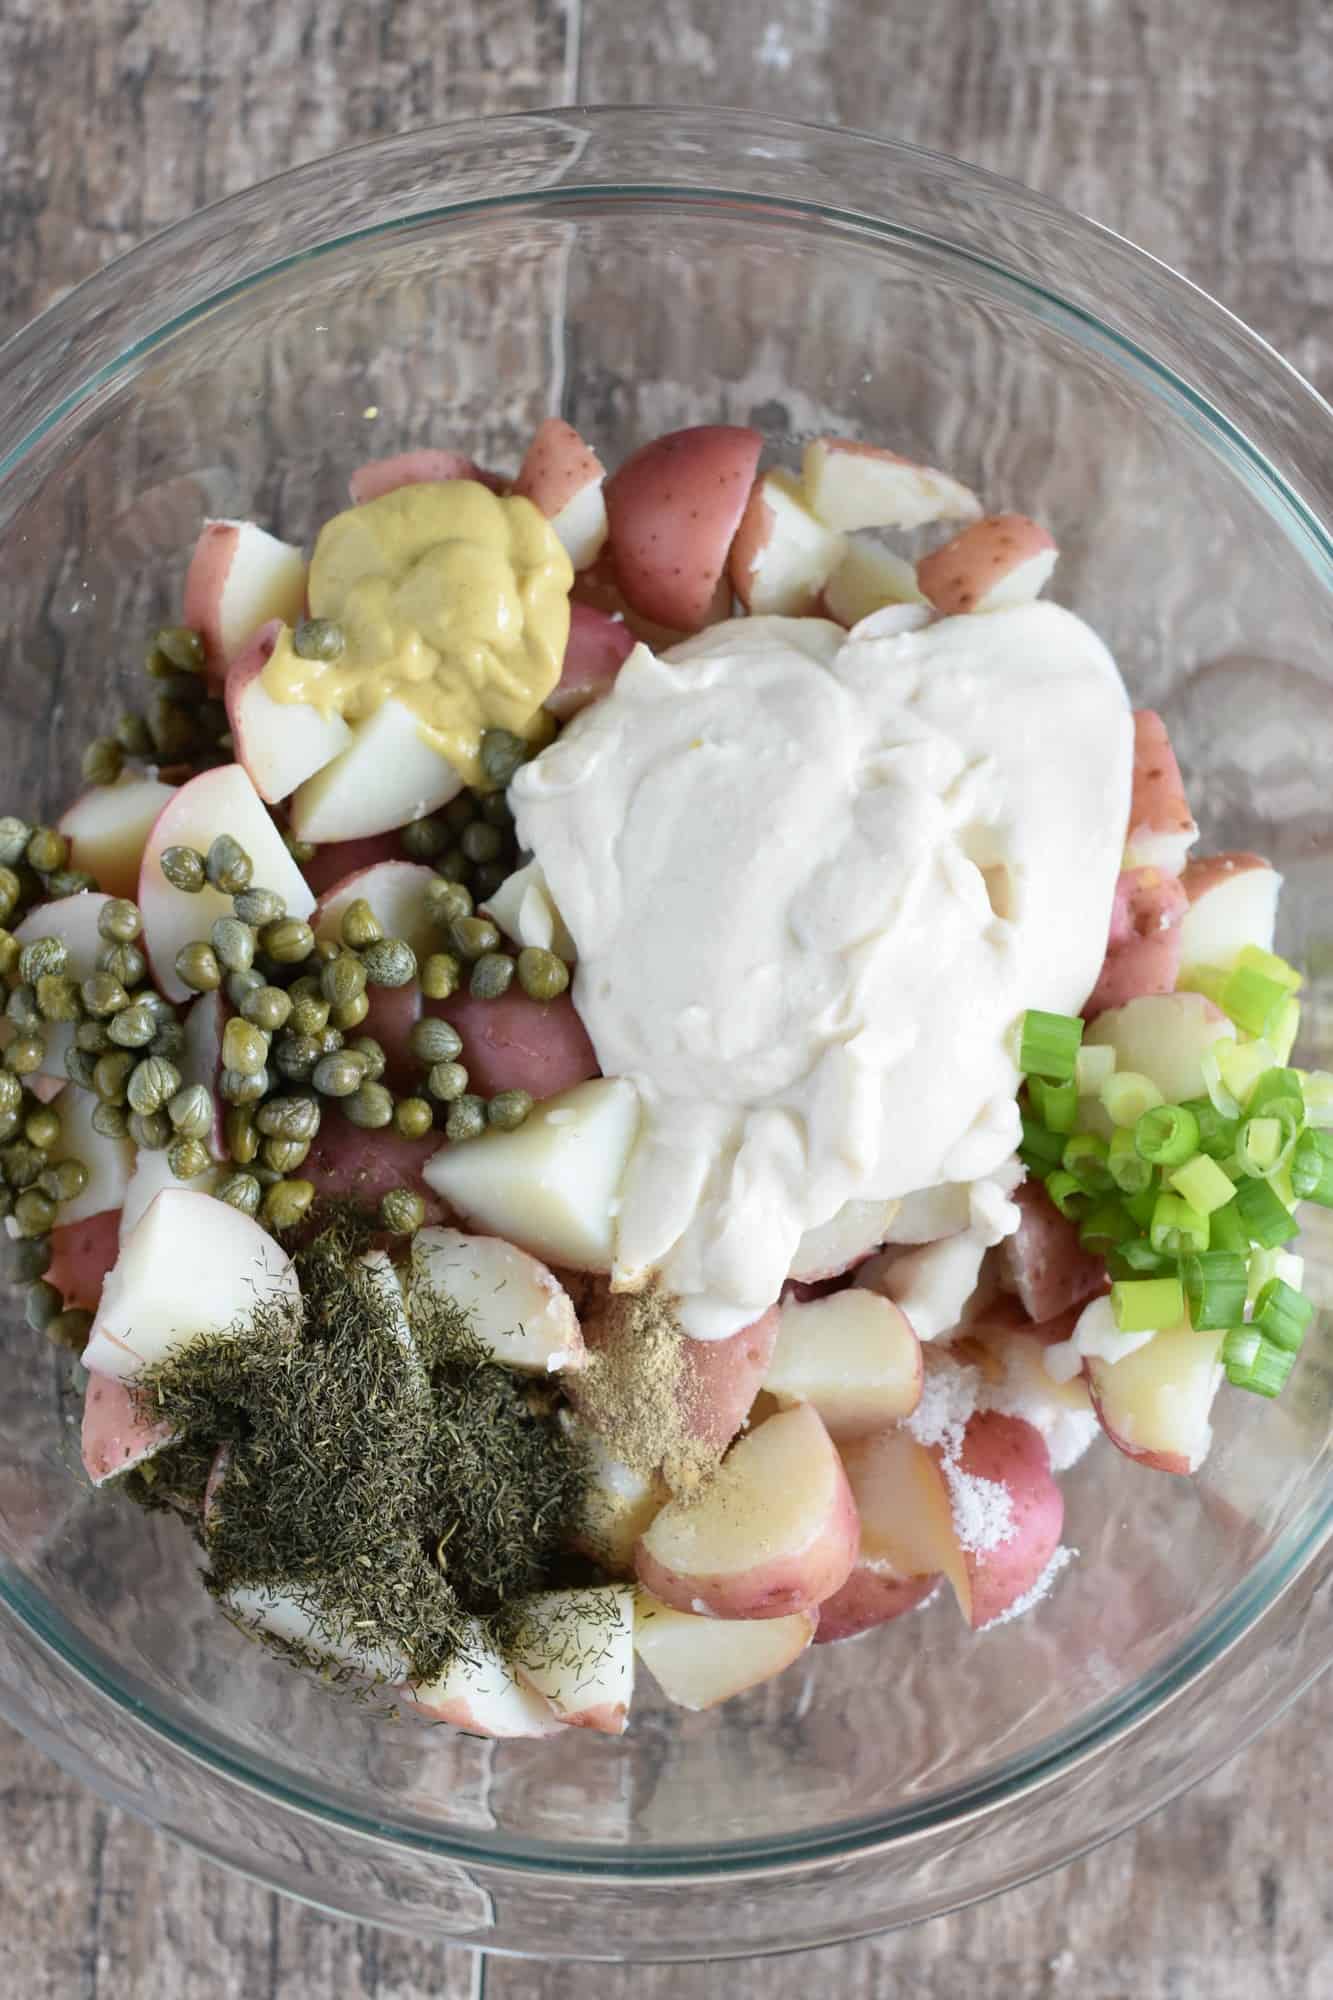 potato salad ingredients added to the potatoes in the glass mixing bowl